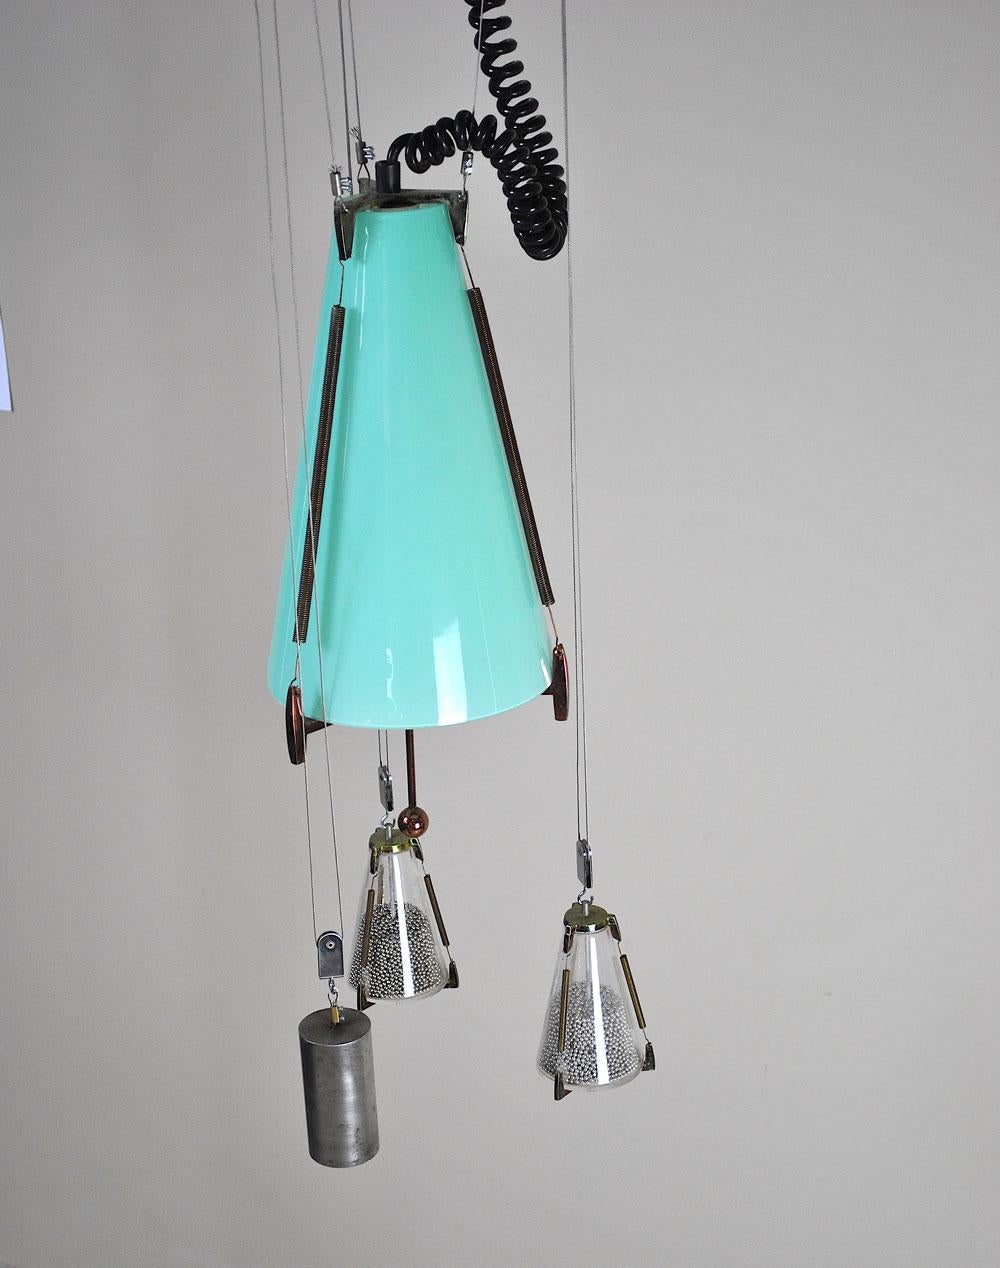 Italian Midcentury Chandelier in the Atomic Style from the 1950s For Sale 4